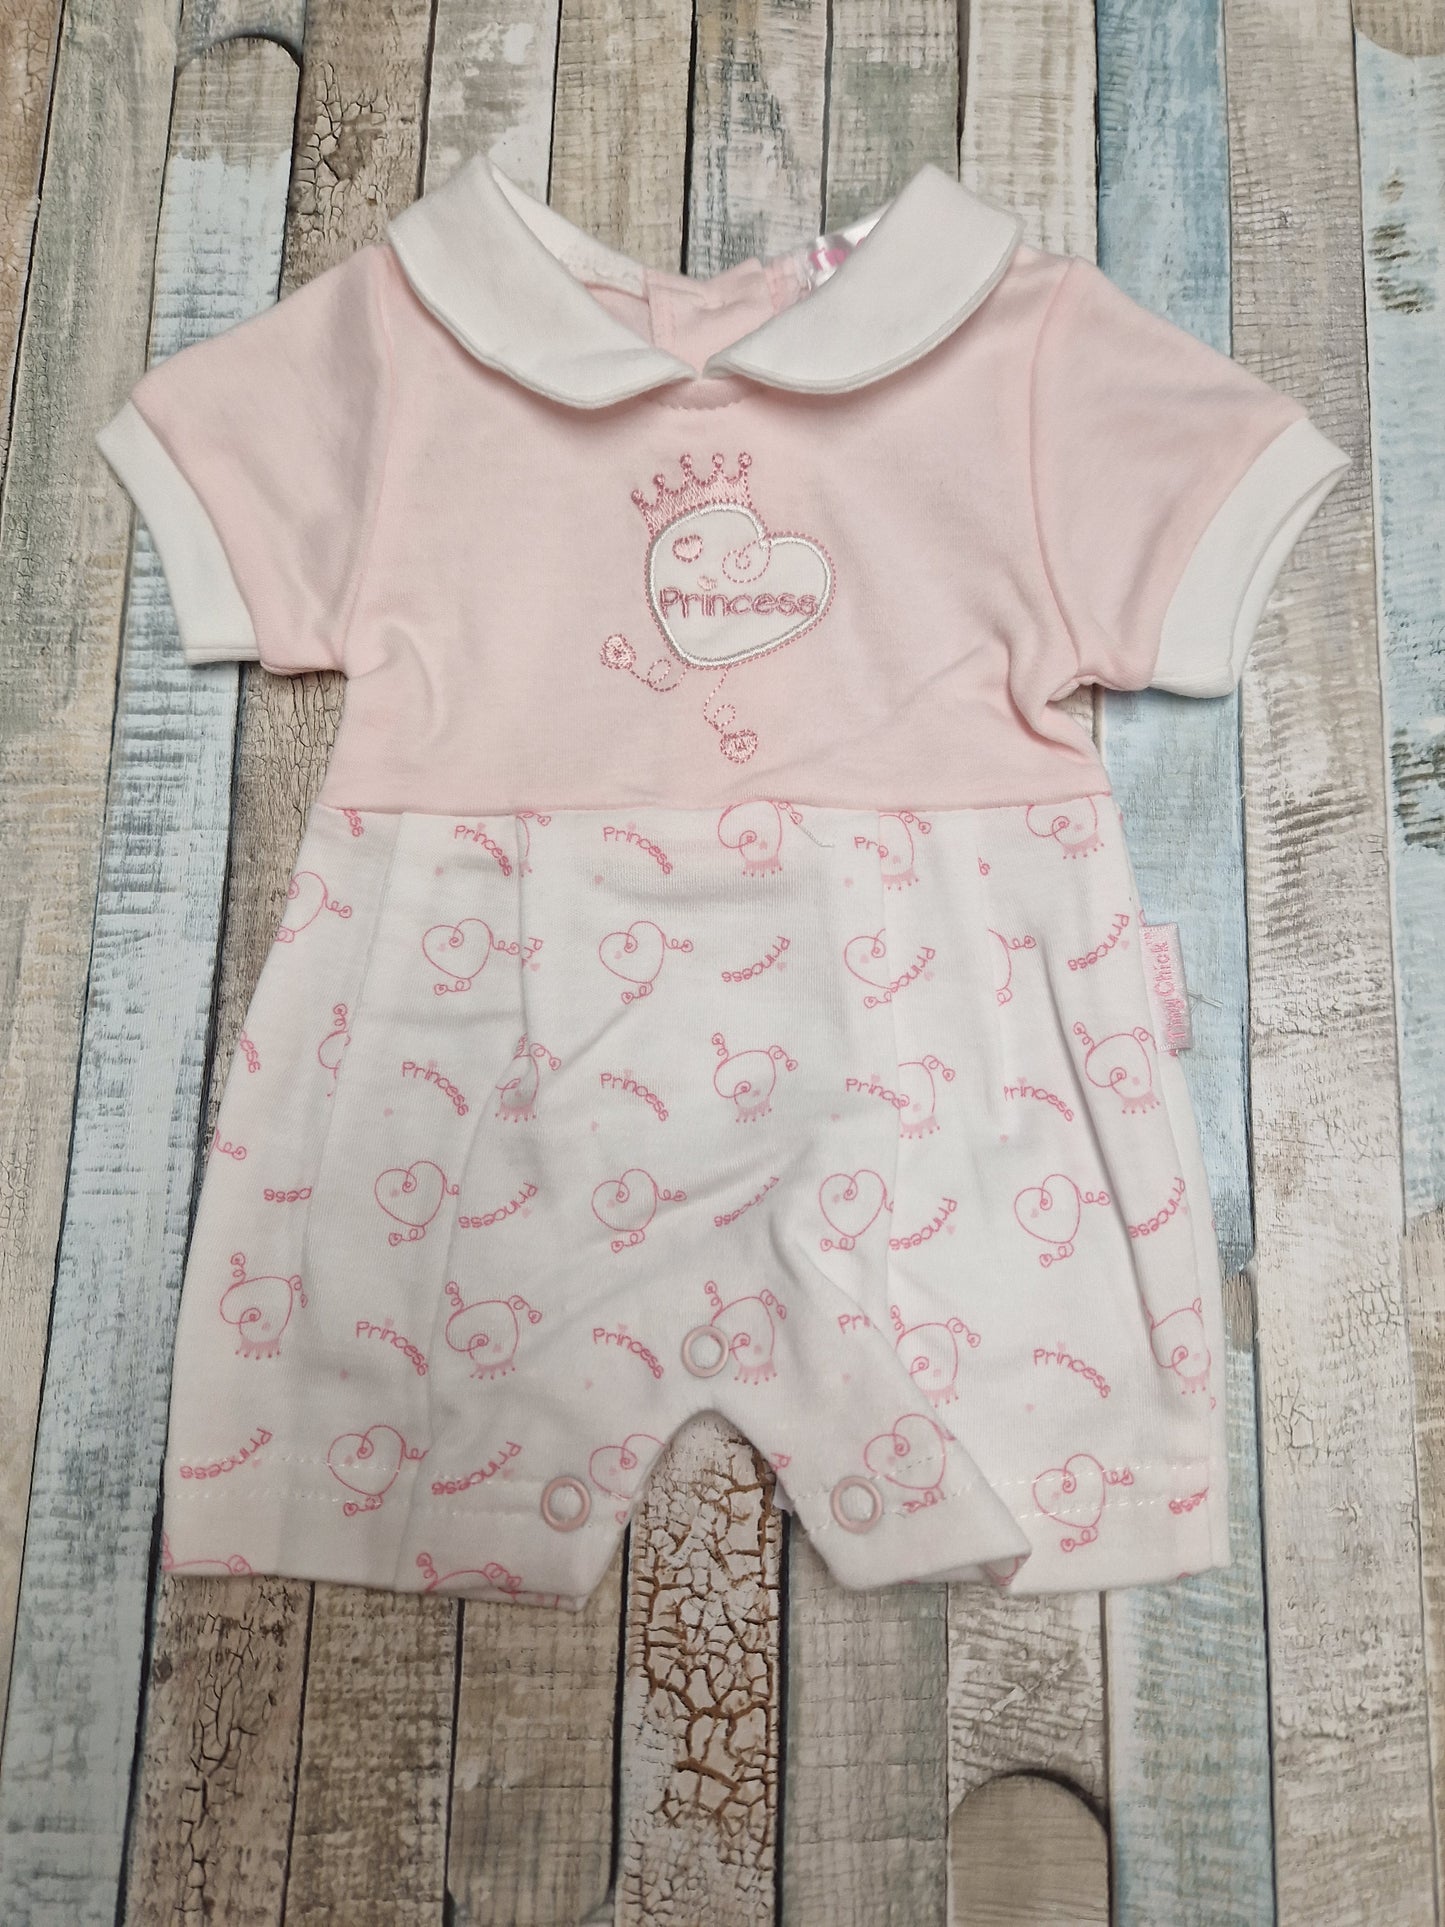 Premature Baby Girl Pink And White Princess Romper